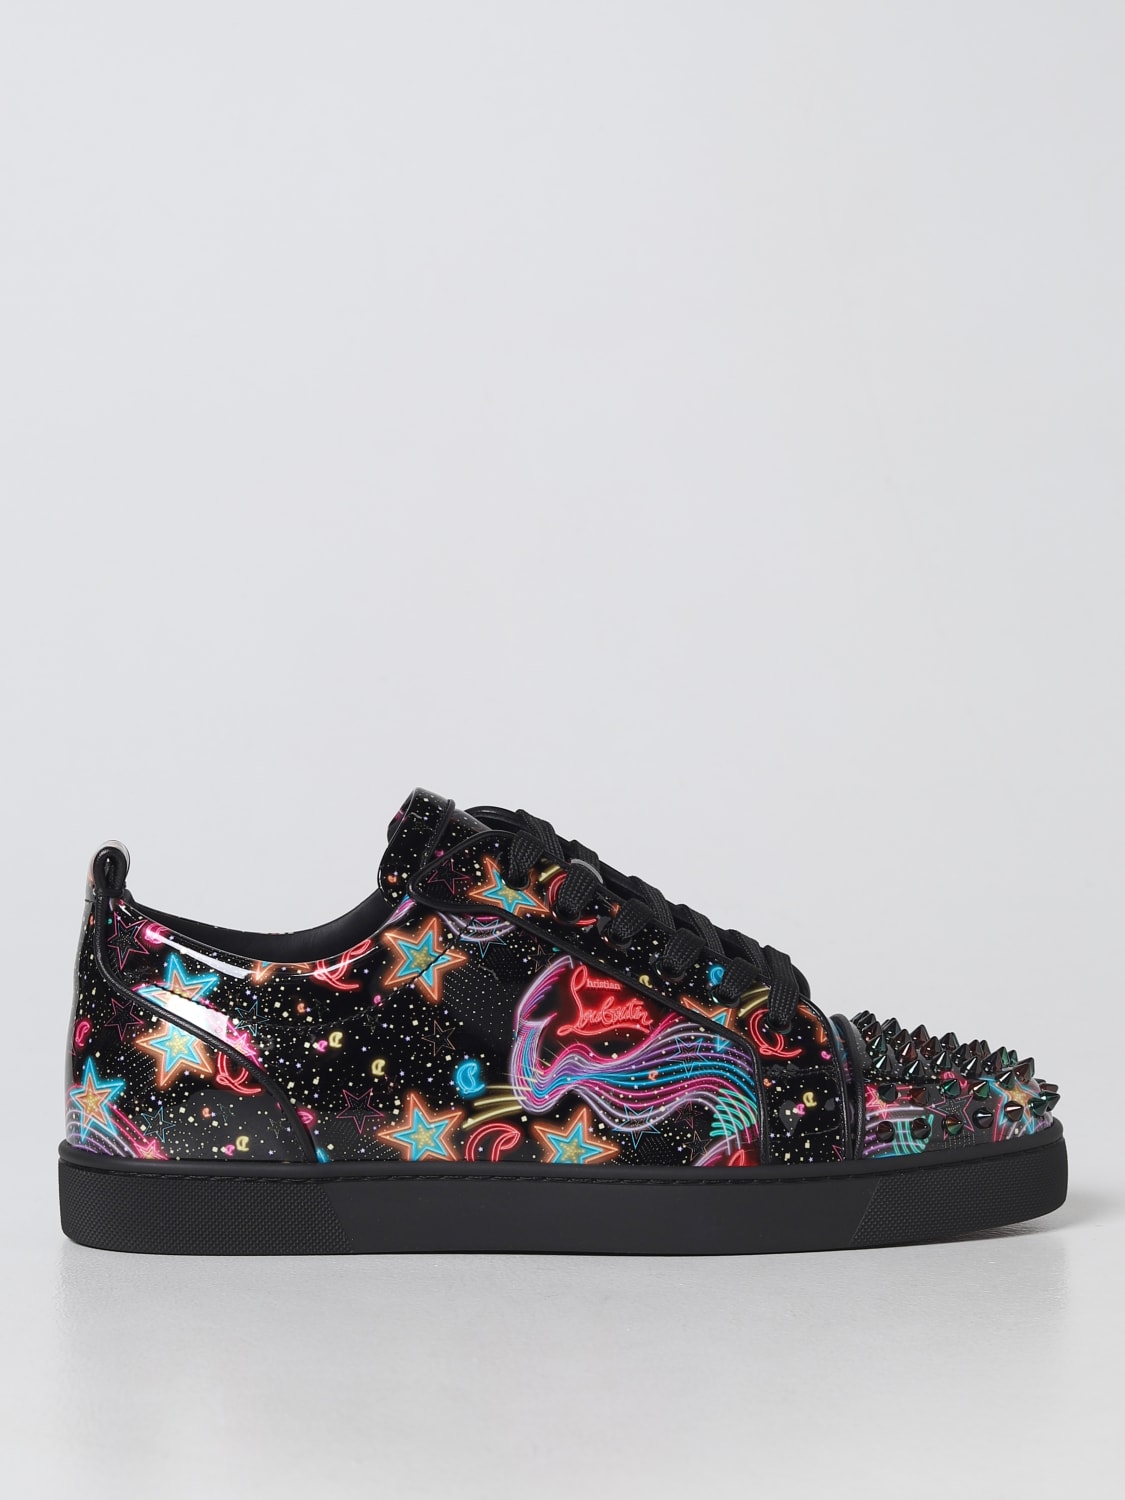 CHRISTIAN LOUBOUTIN: Louis Junior Spikes sneakers printed patent leather | Christian Louboutin sneakers 1230466 online on GIGLIO.COM